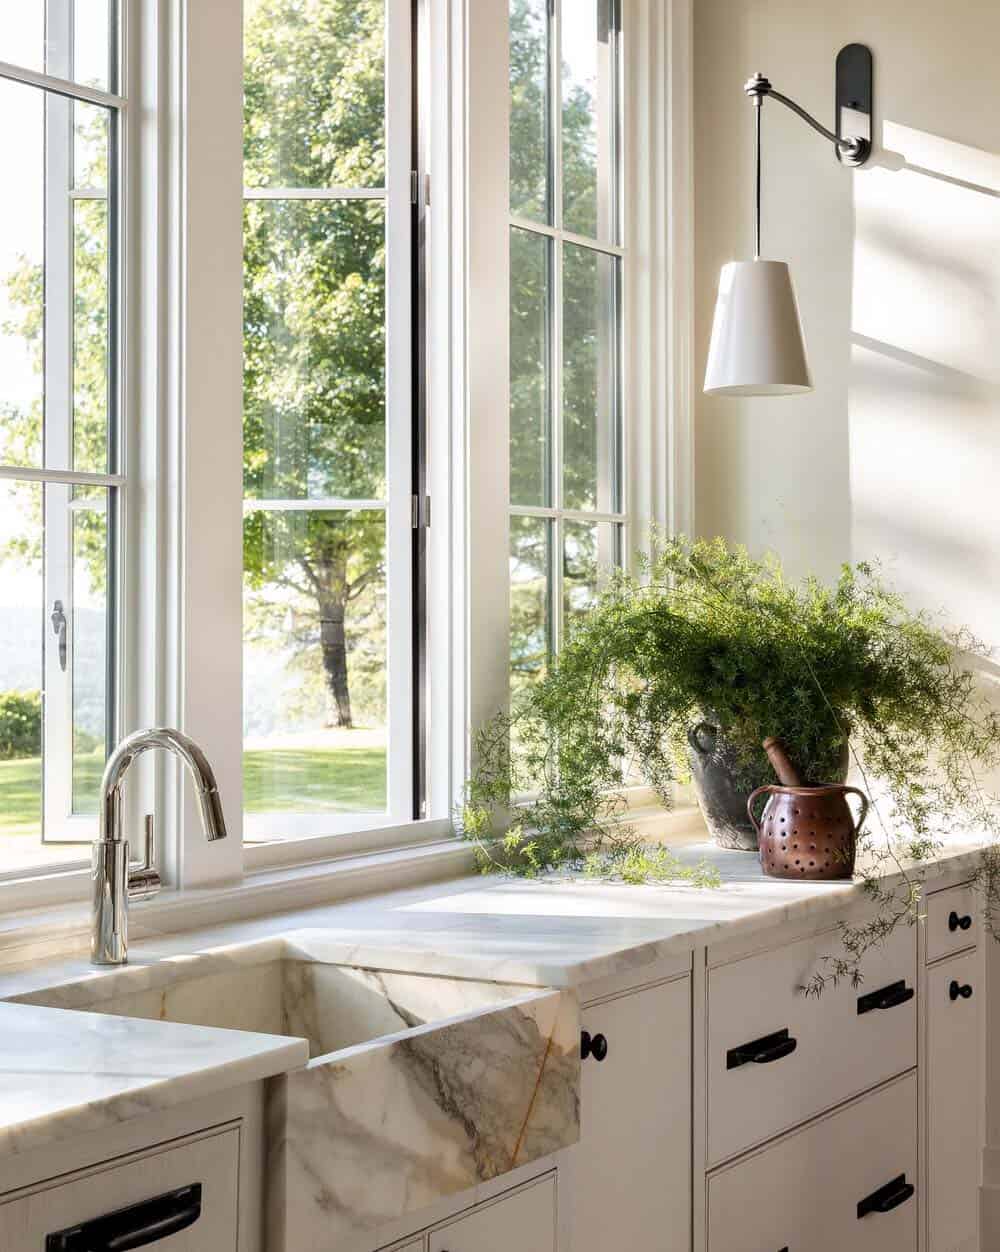 modern rustic kitchen sink wall with windows